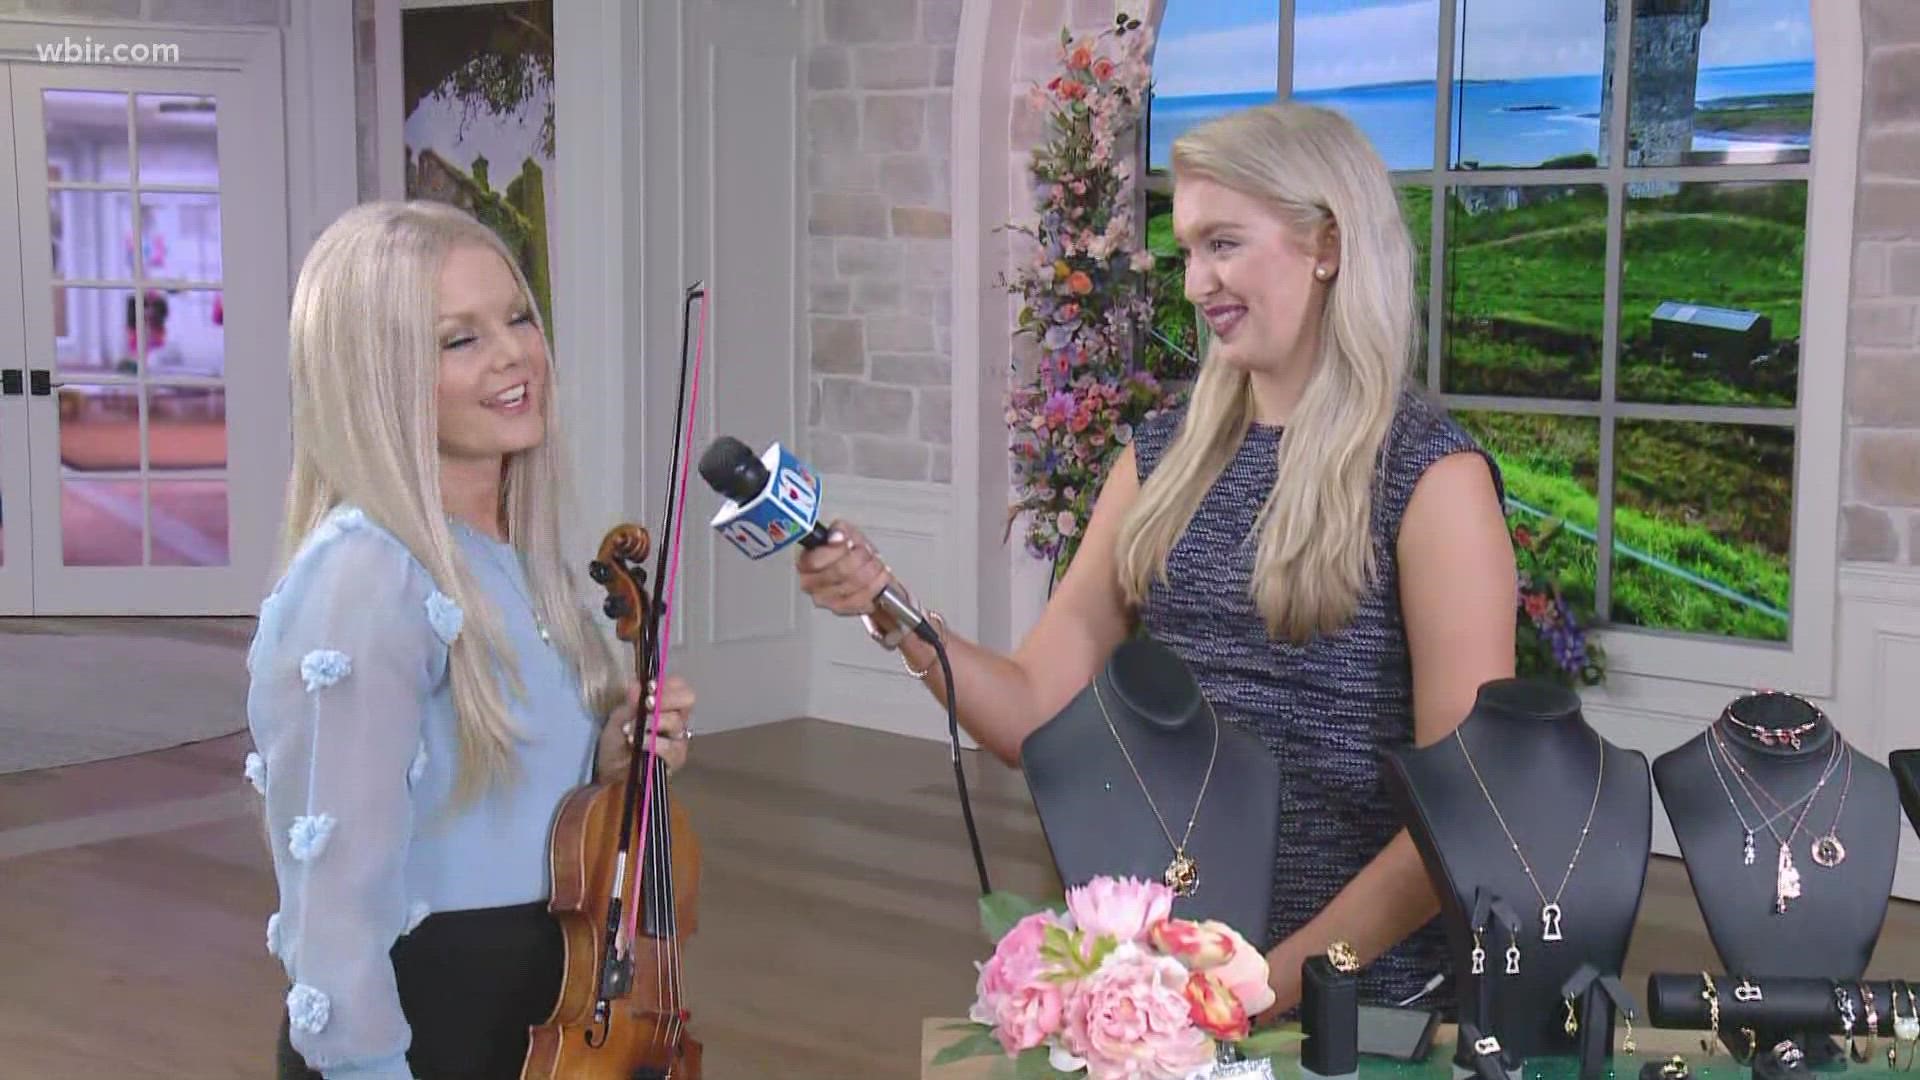 World-renowned celtic violinist Máiréad Nesbitt has teamed up with JTV for a new jewelry line. Sept. 9, 2021-4pm